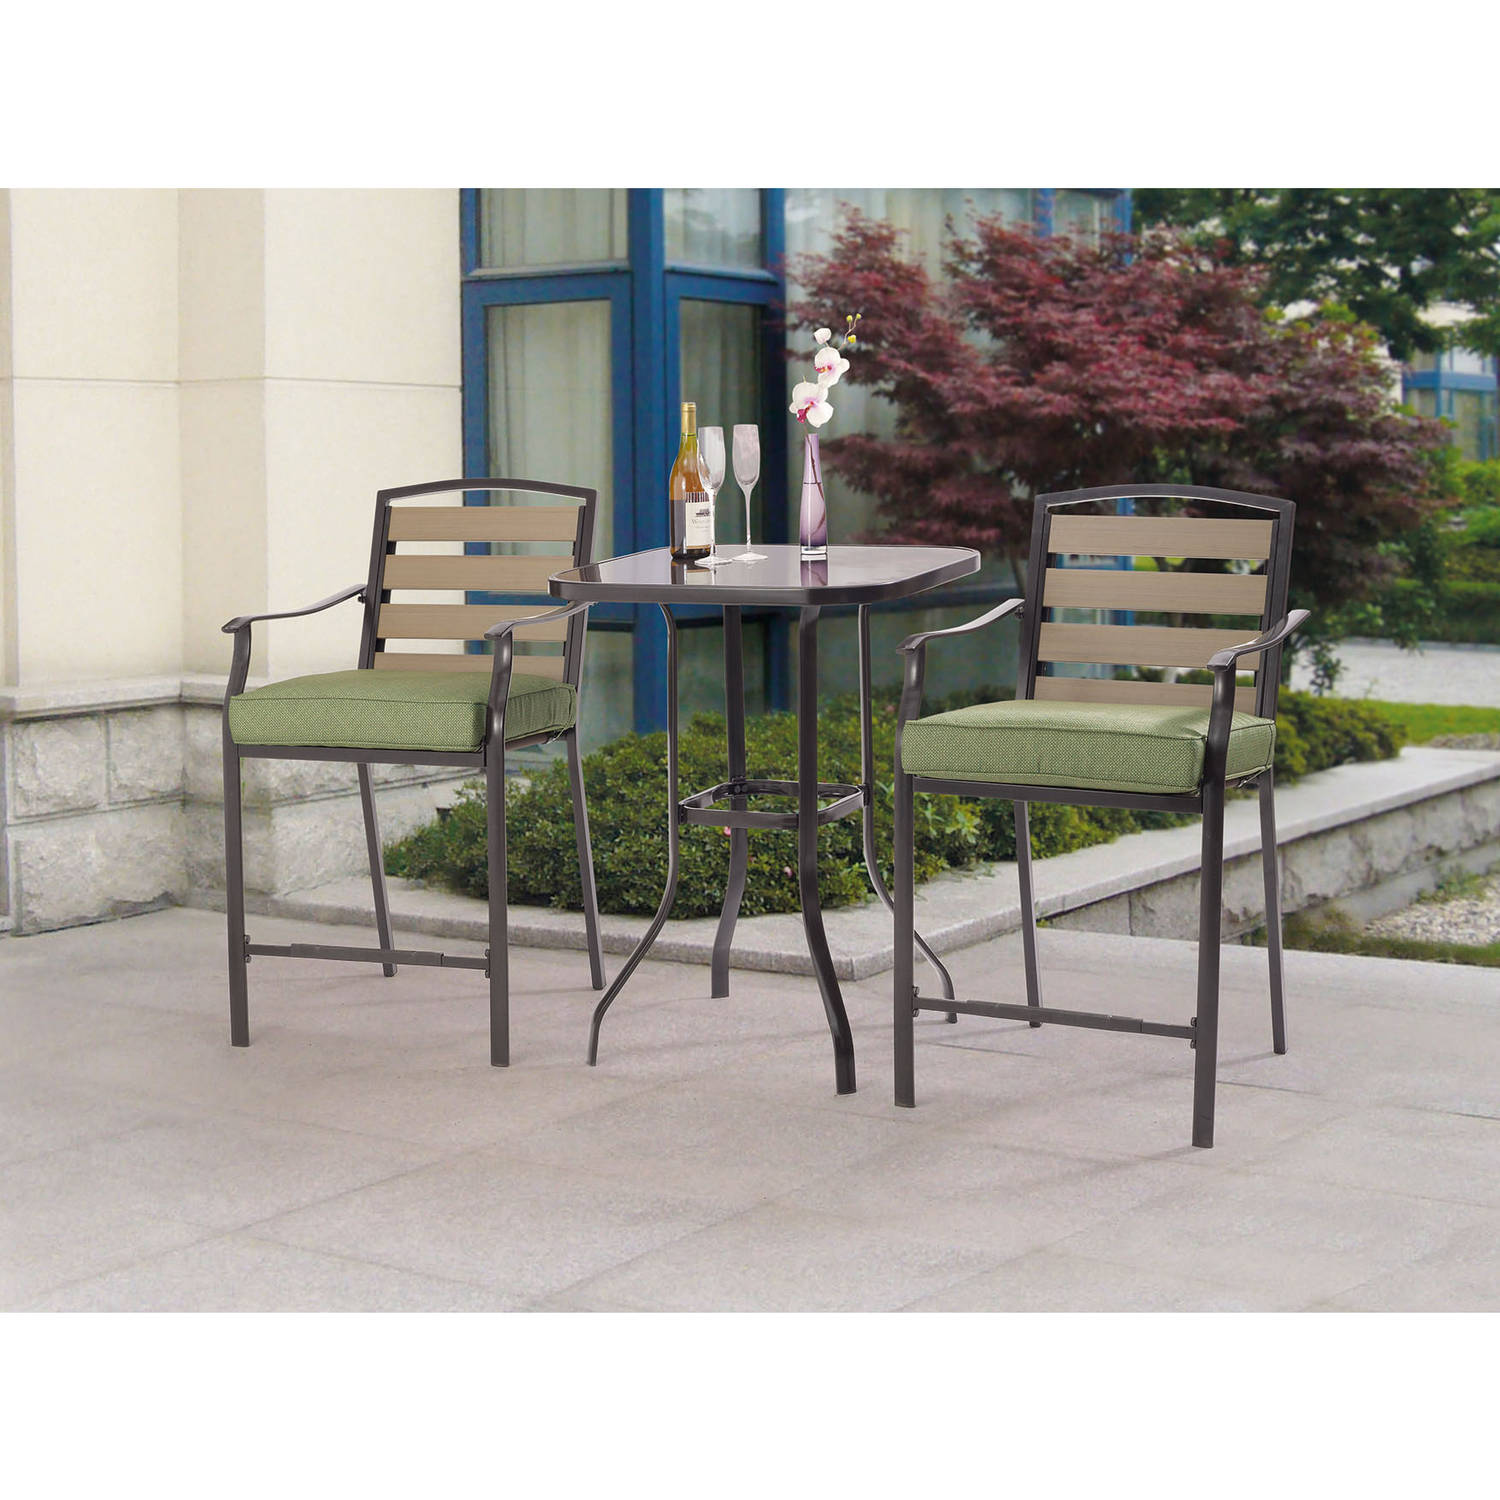 Mainstays Bryant Meadows 3pc Balcony Set, Green - image 1 of 5